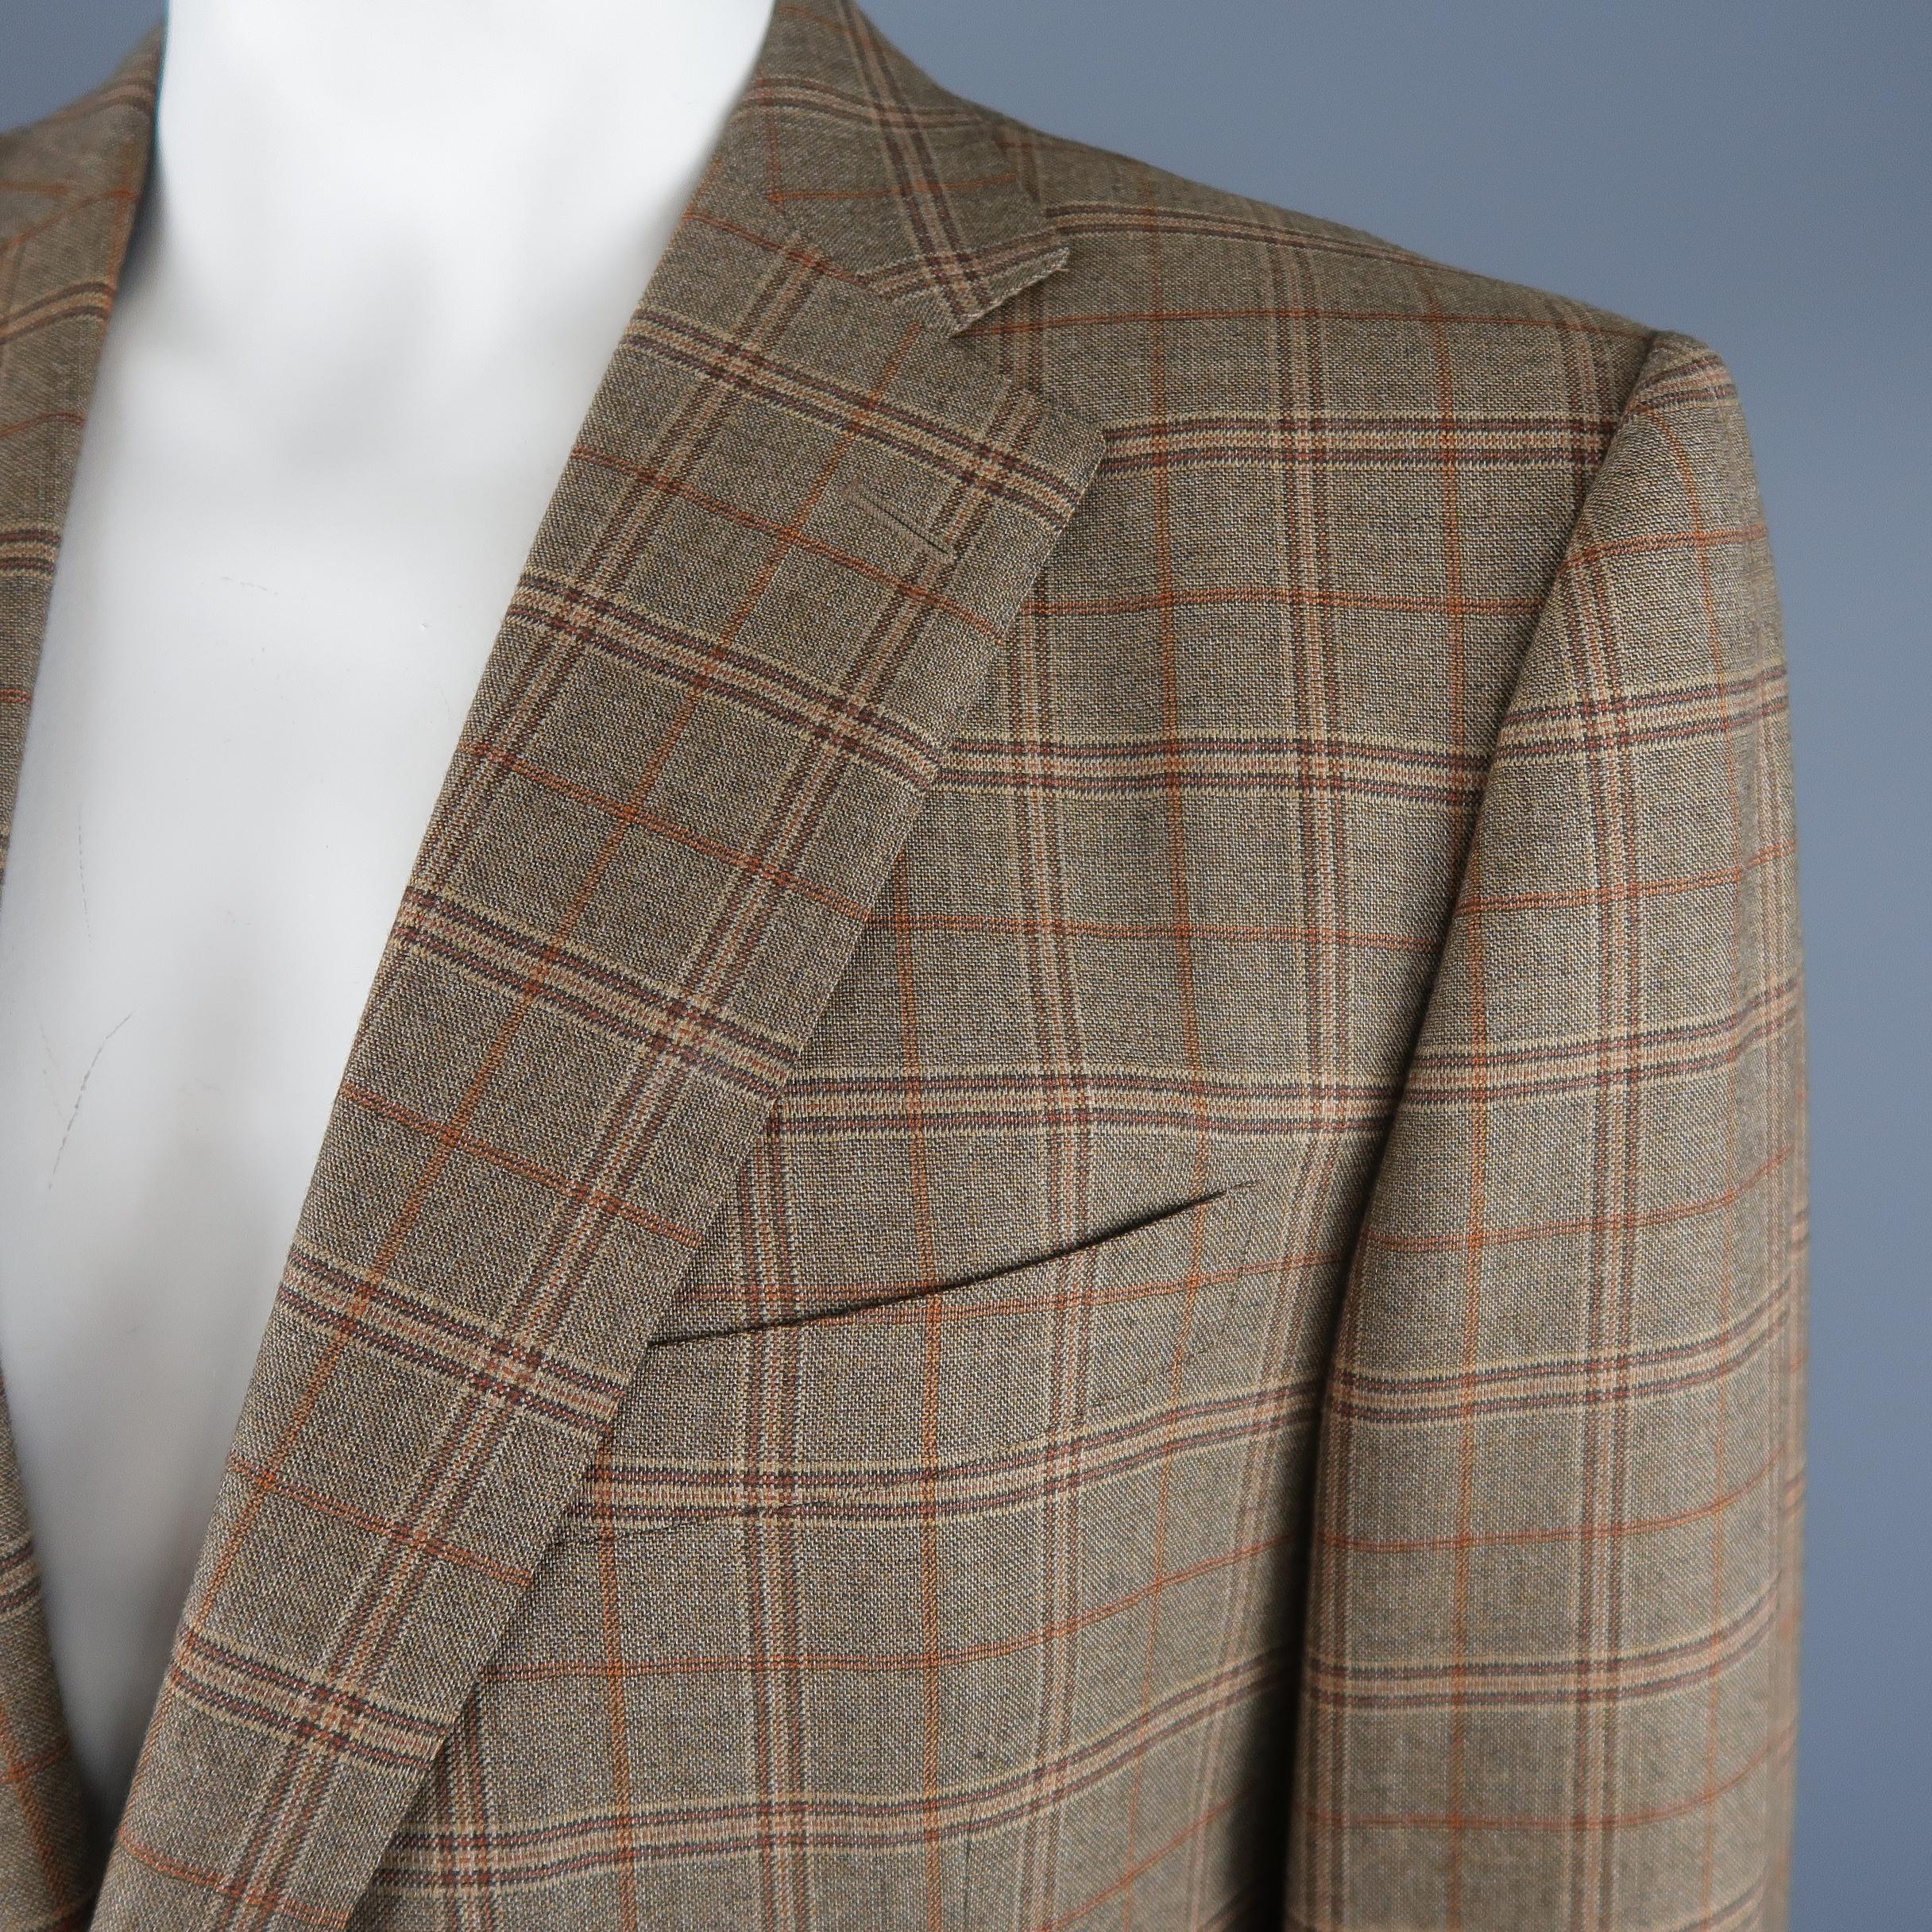 ERMENEGILDO ZEGNA sport coat comes in taupe and orange plaid windowpane plaid wool with a notch lapel, two button single breasted closure, and flap pockets. Made in Italy.
 
Excellent Pre-Owned Condition.
Marked: IT 58 L
 
Measurements:
 
Shoulder: